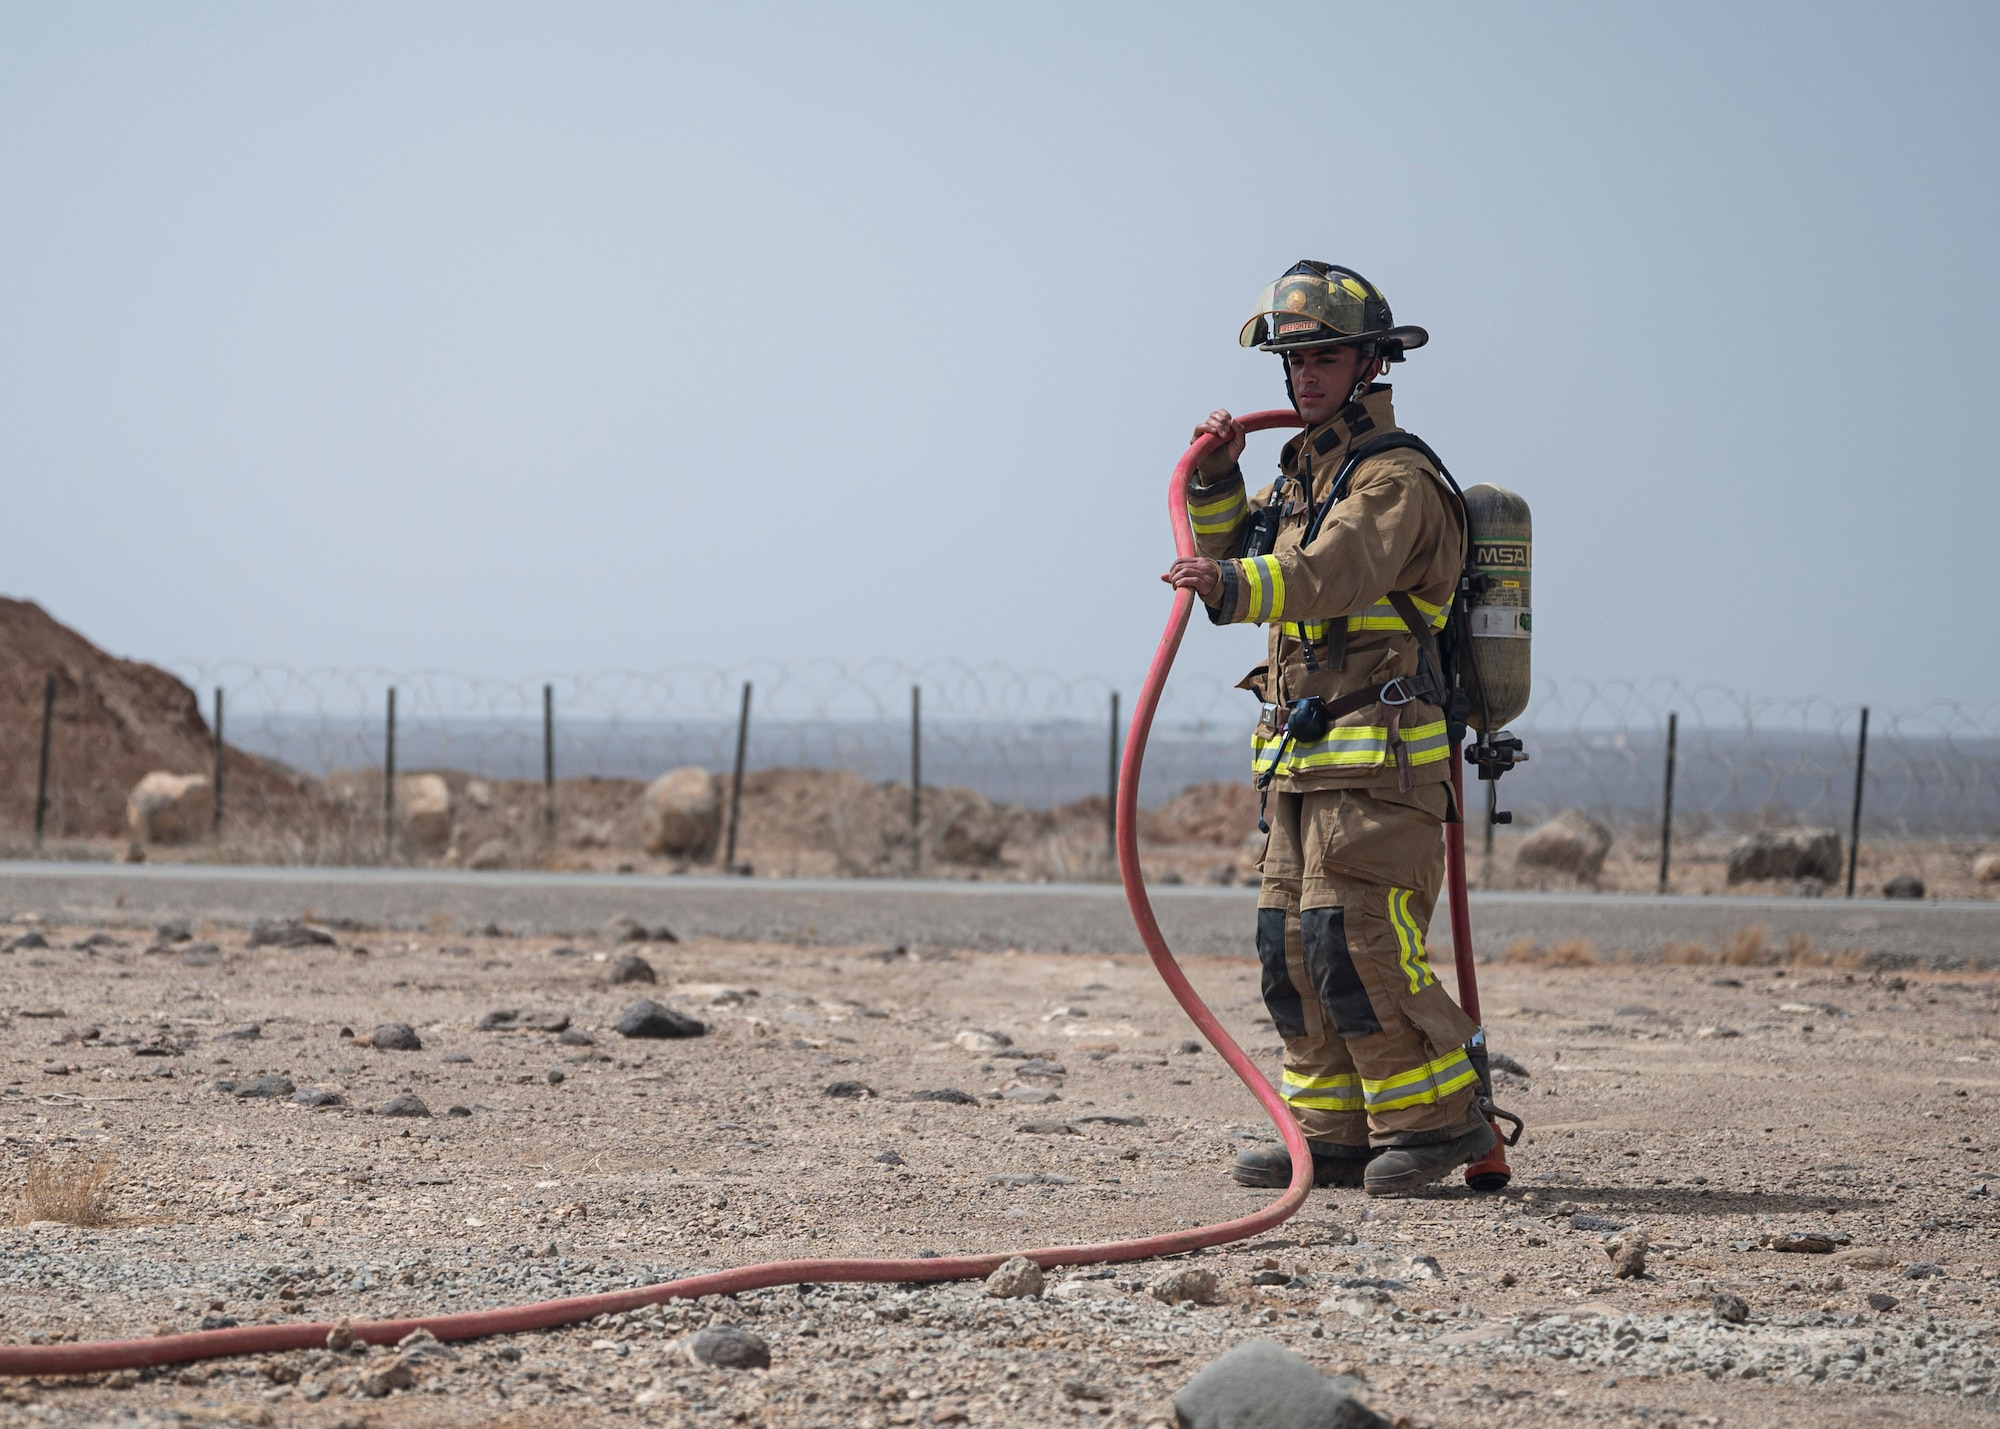 A firefighter operates a water hose during the Major Accident